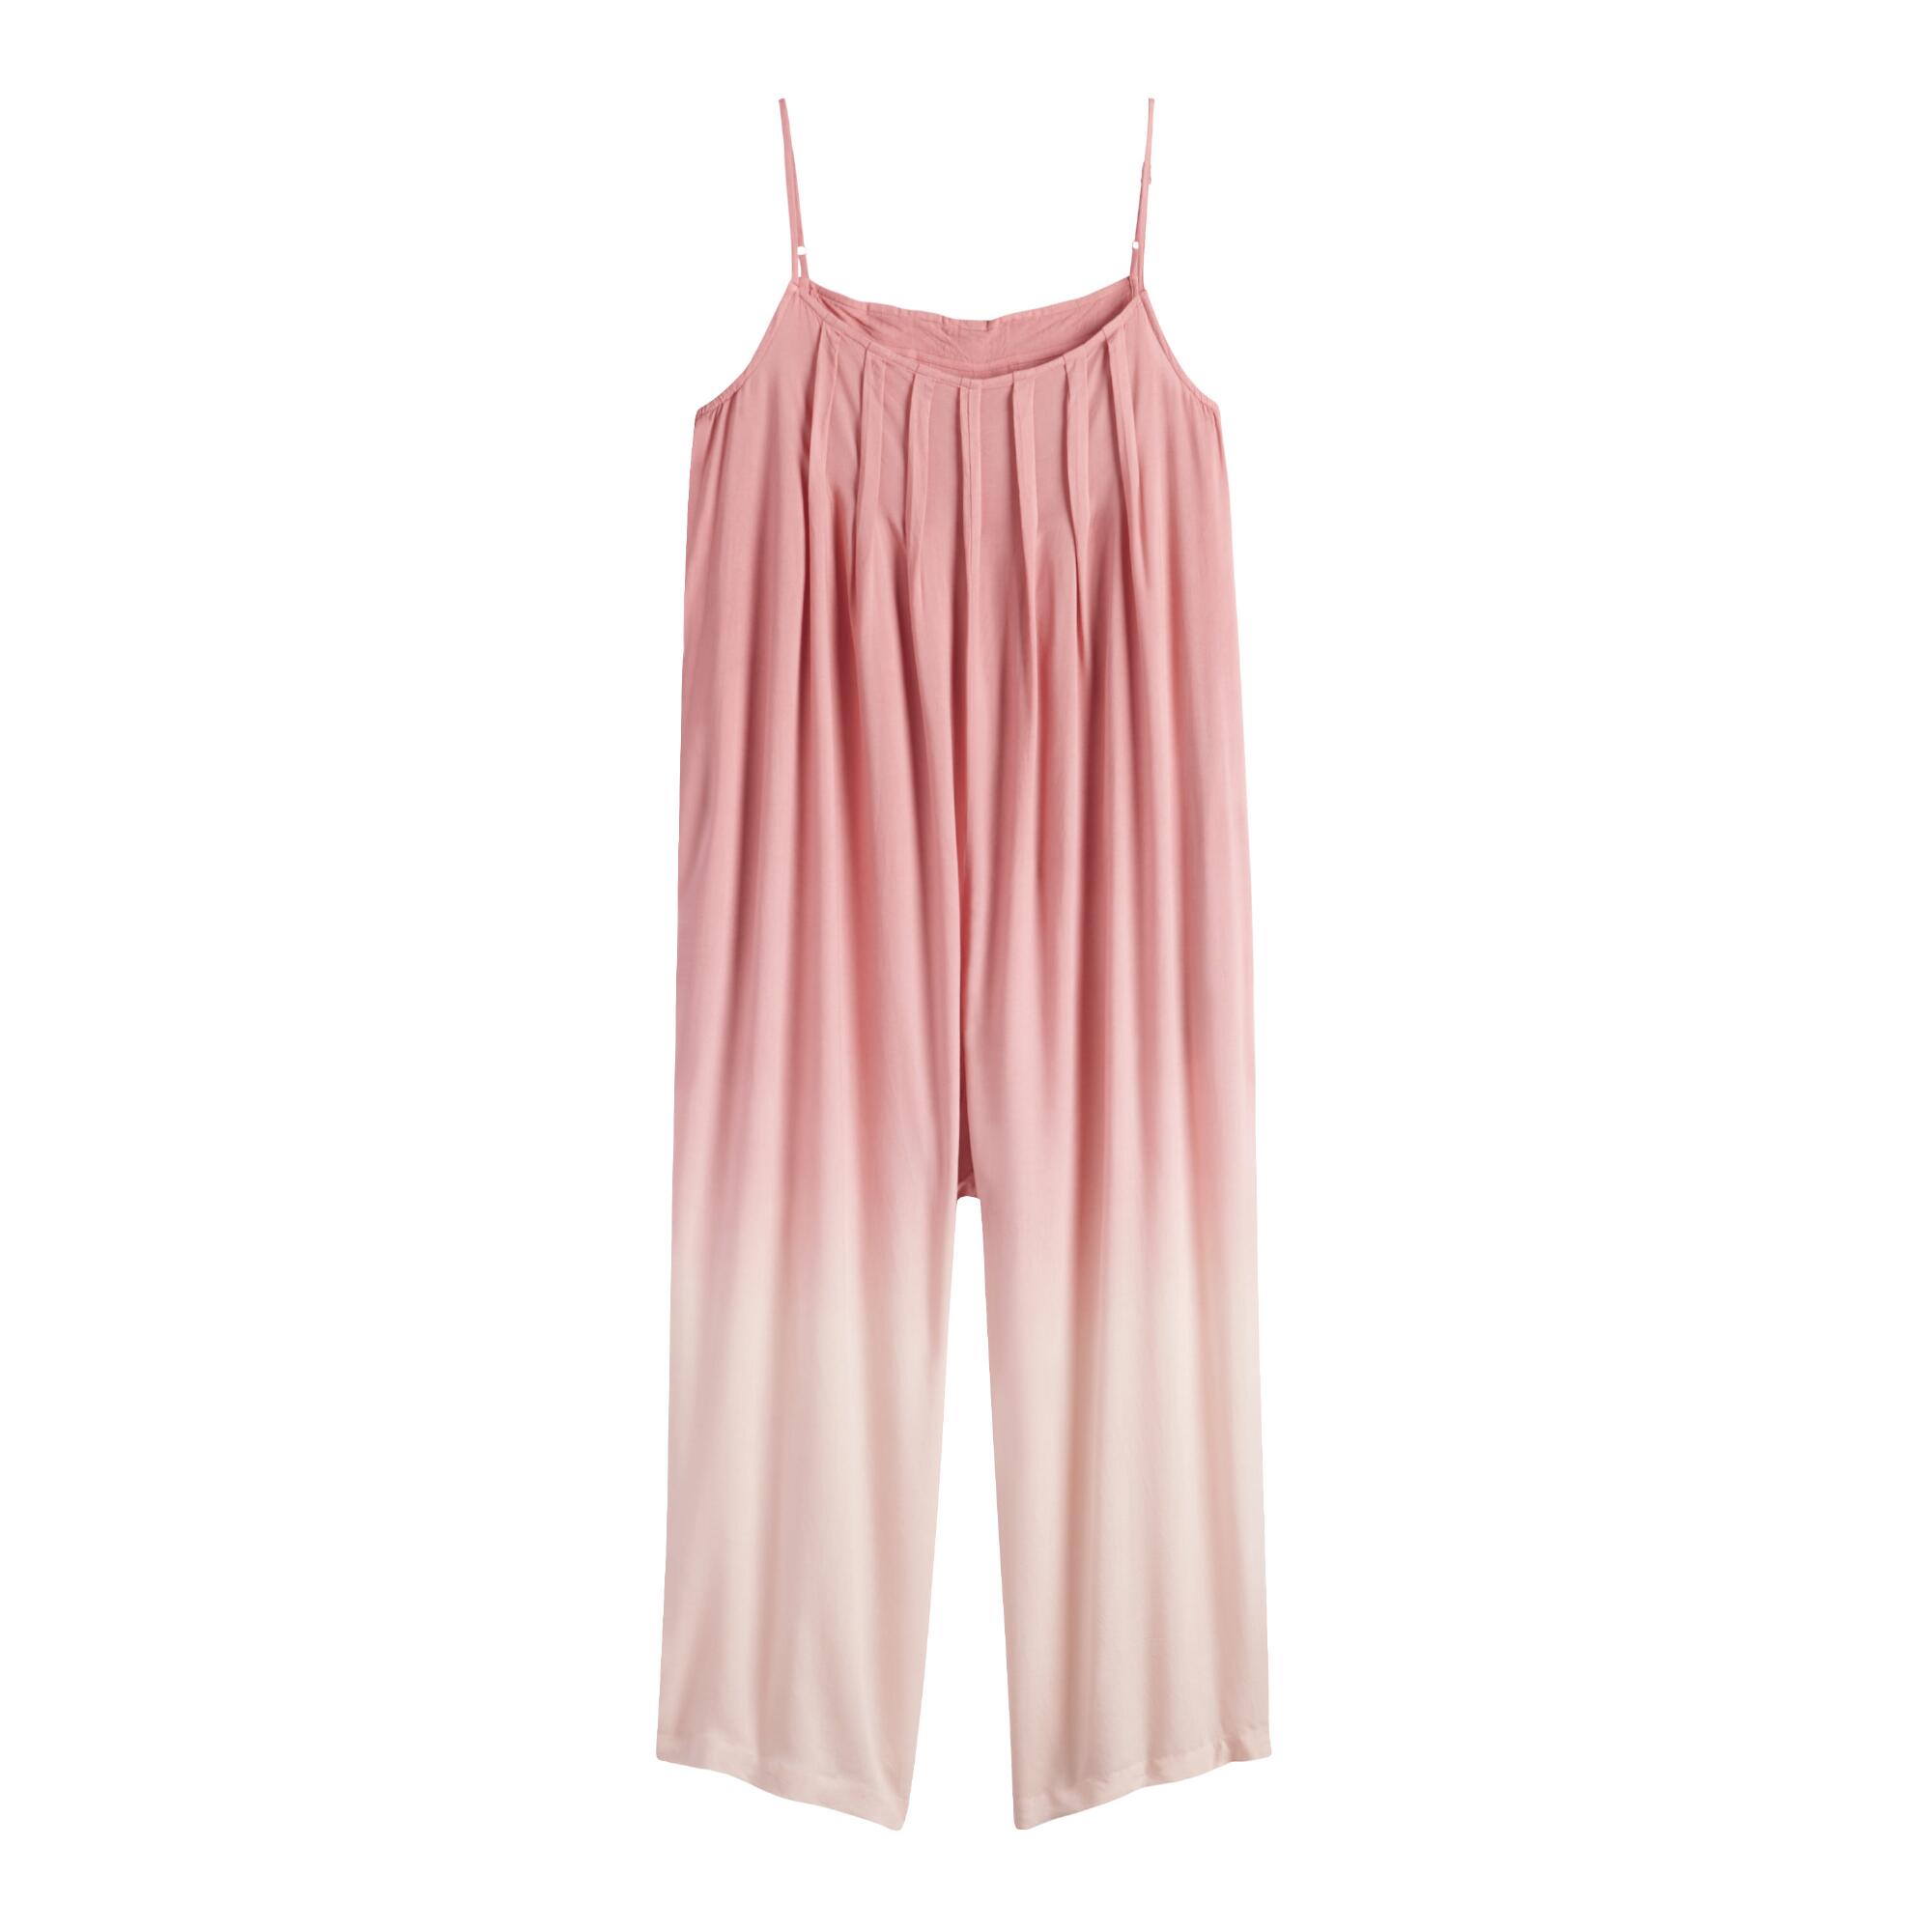 Pink Ombre Pleated Jumpsuit - Small by World Market